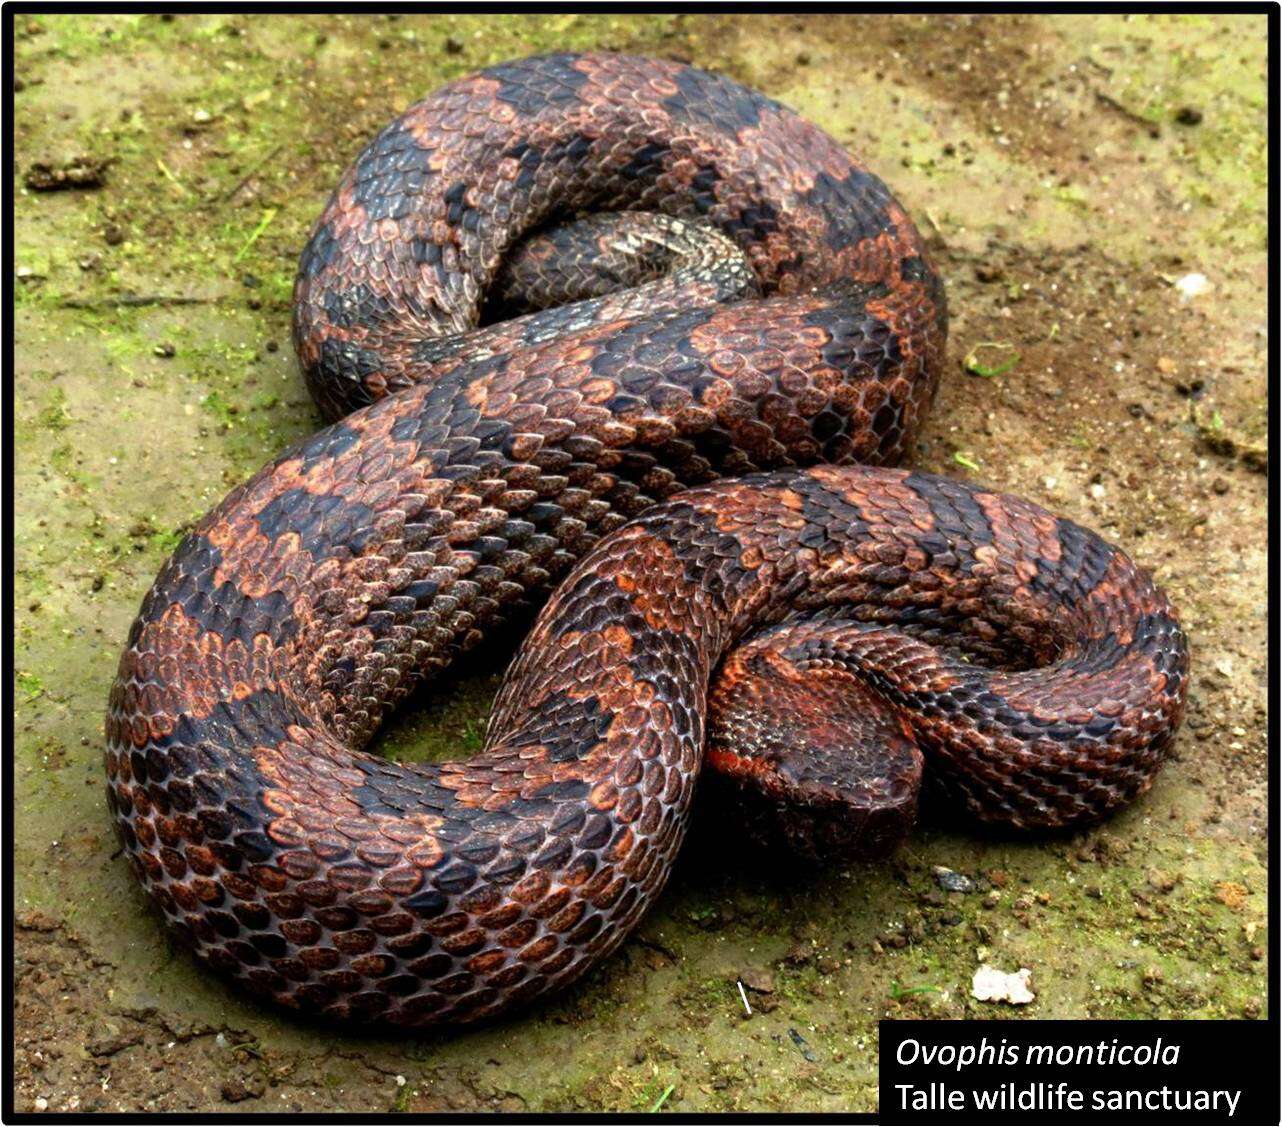 Image of Chinese Mountain Pit Viper